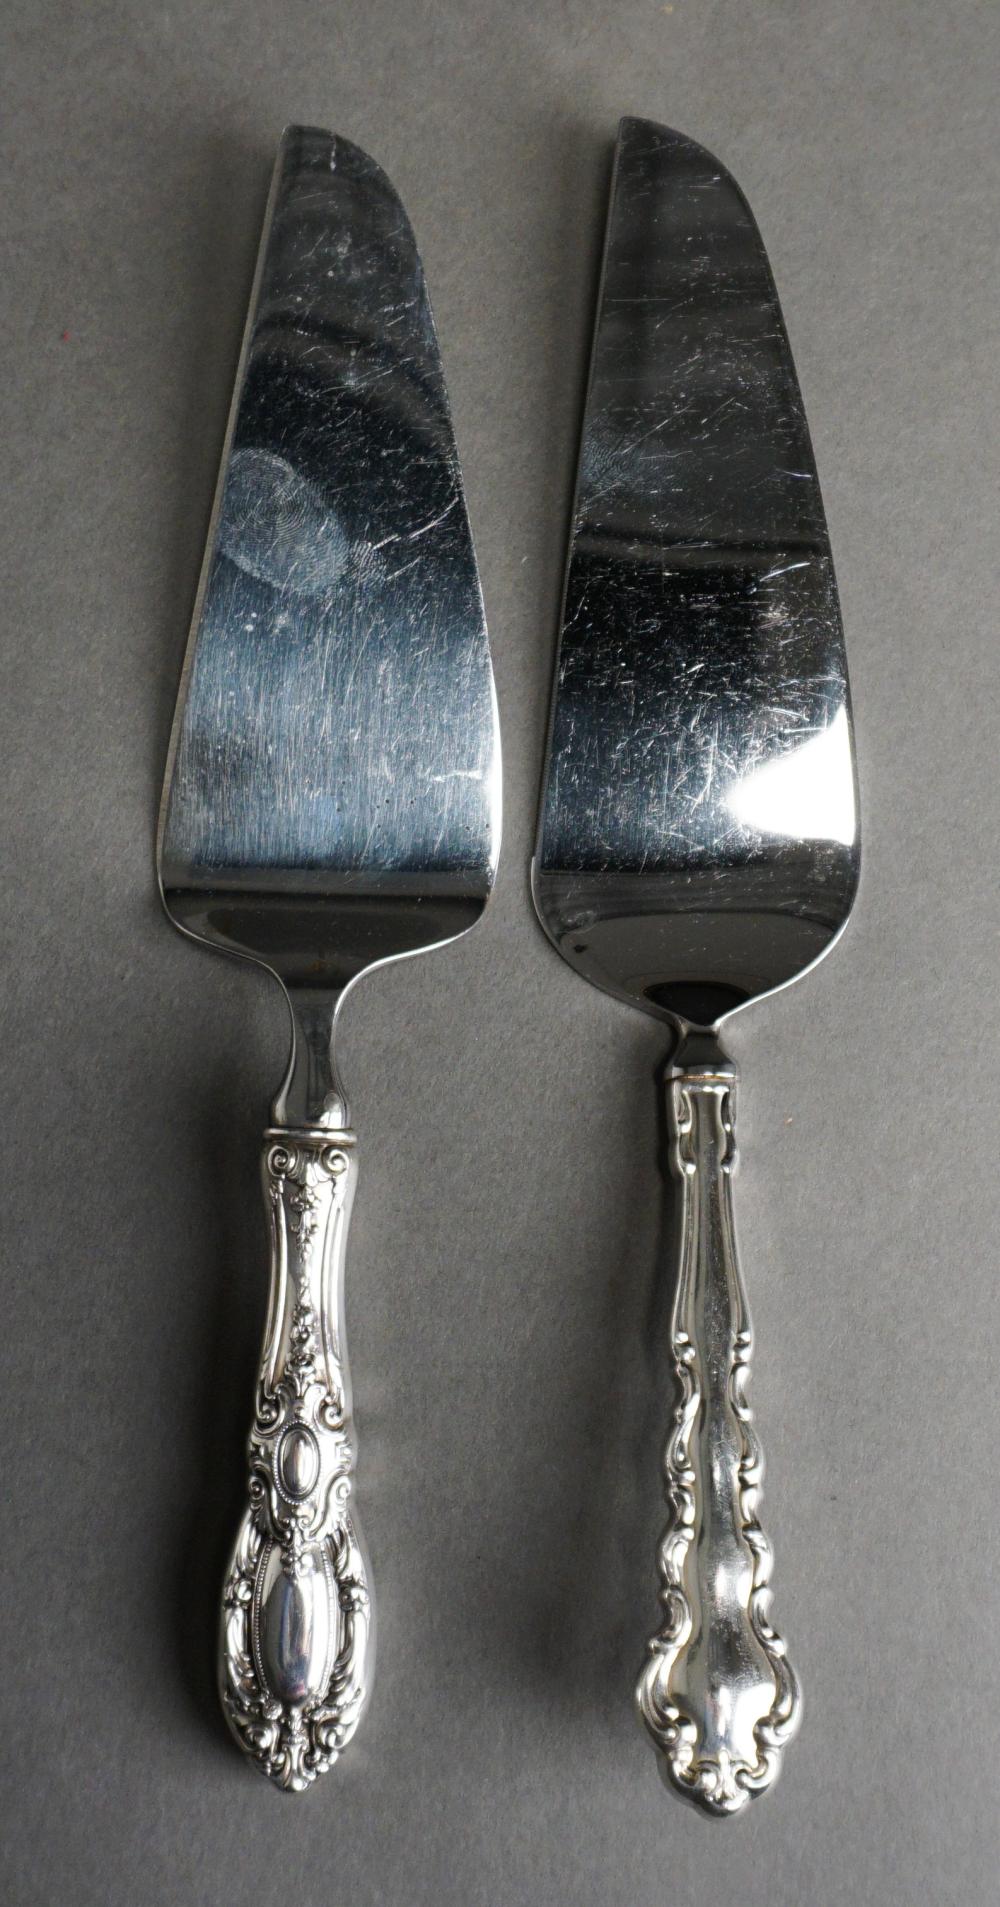 TWO STERLING SILVER HANDLED SERVERSTwo